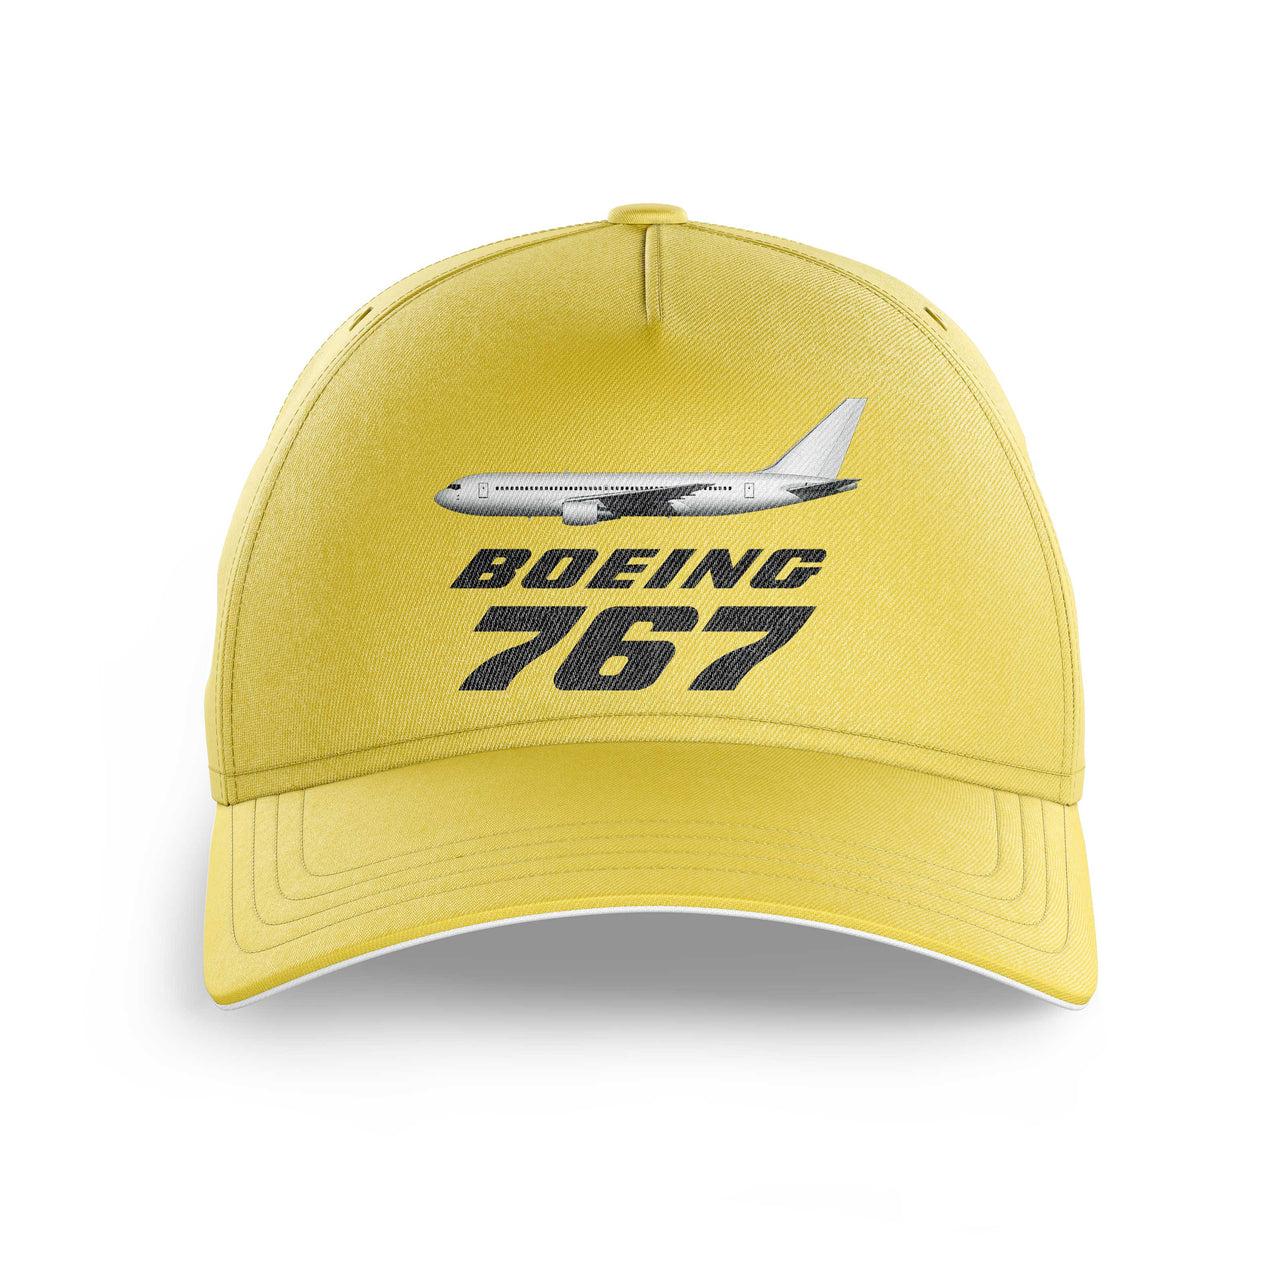 The Boeing 767 Printed Hats